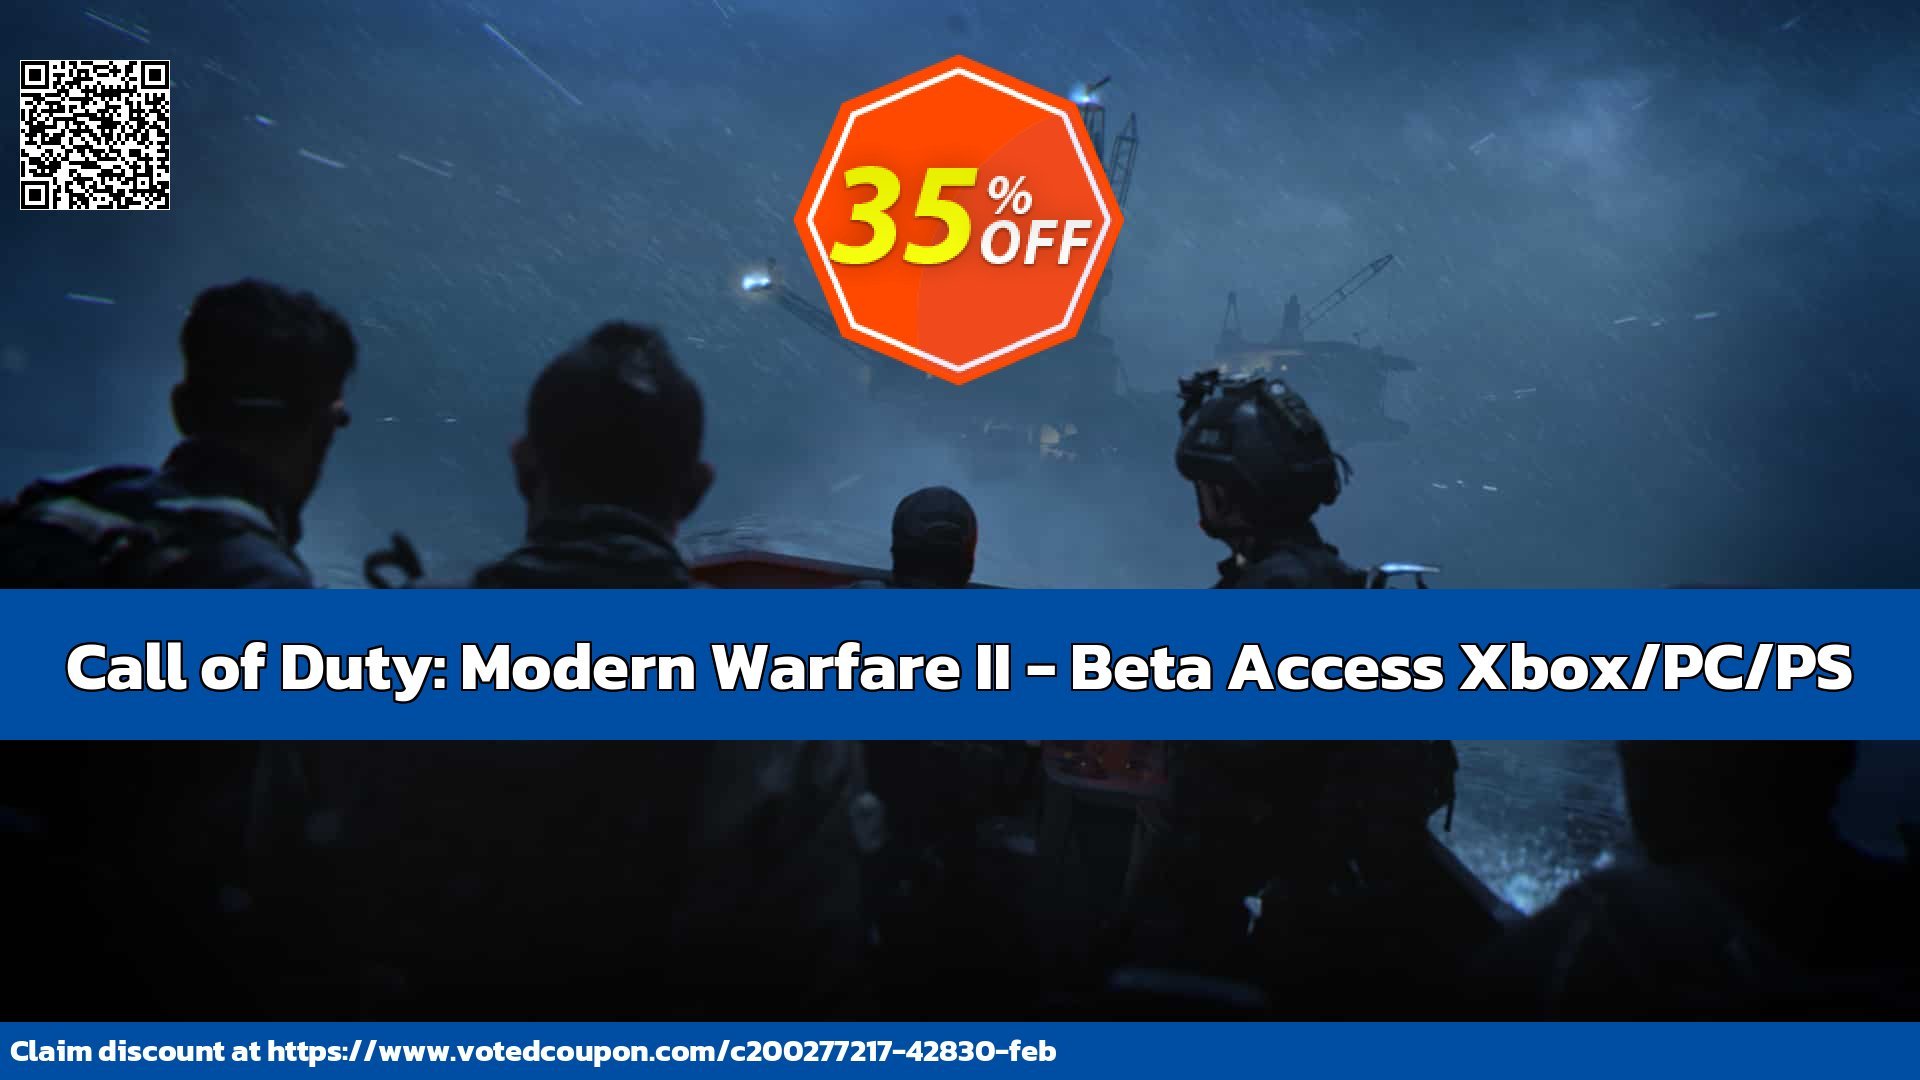 Call of Duty: Modern Warfare II - Beta Access Xbox/PC/PS Coupon Code May 2024, 35% OFF - VotedCoupon